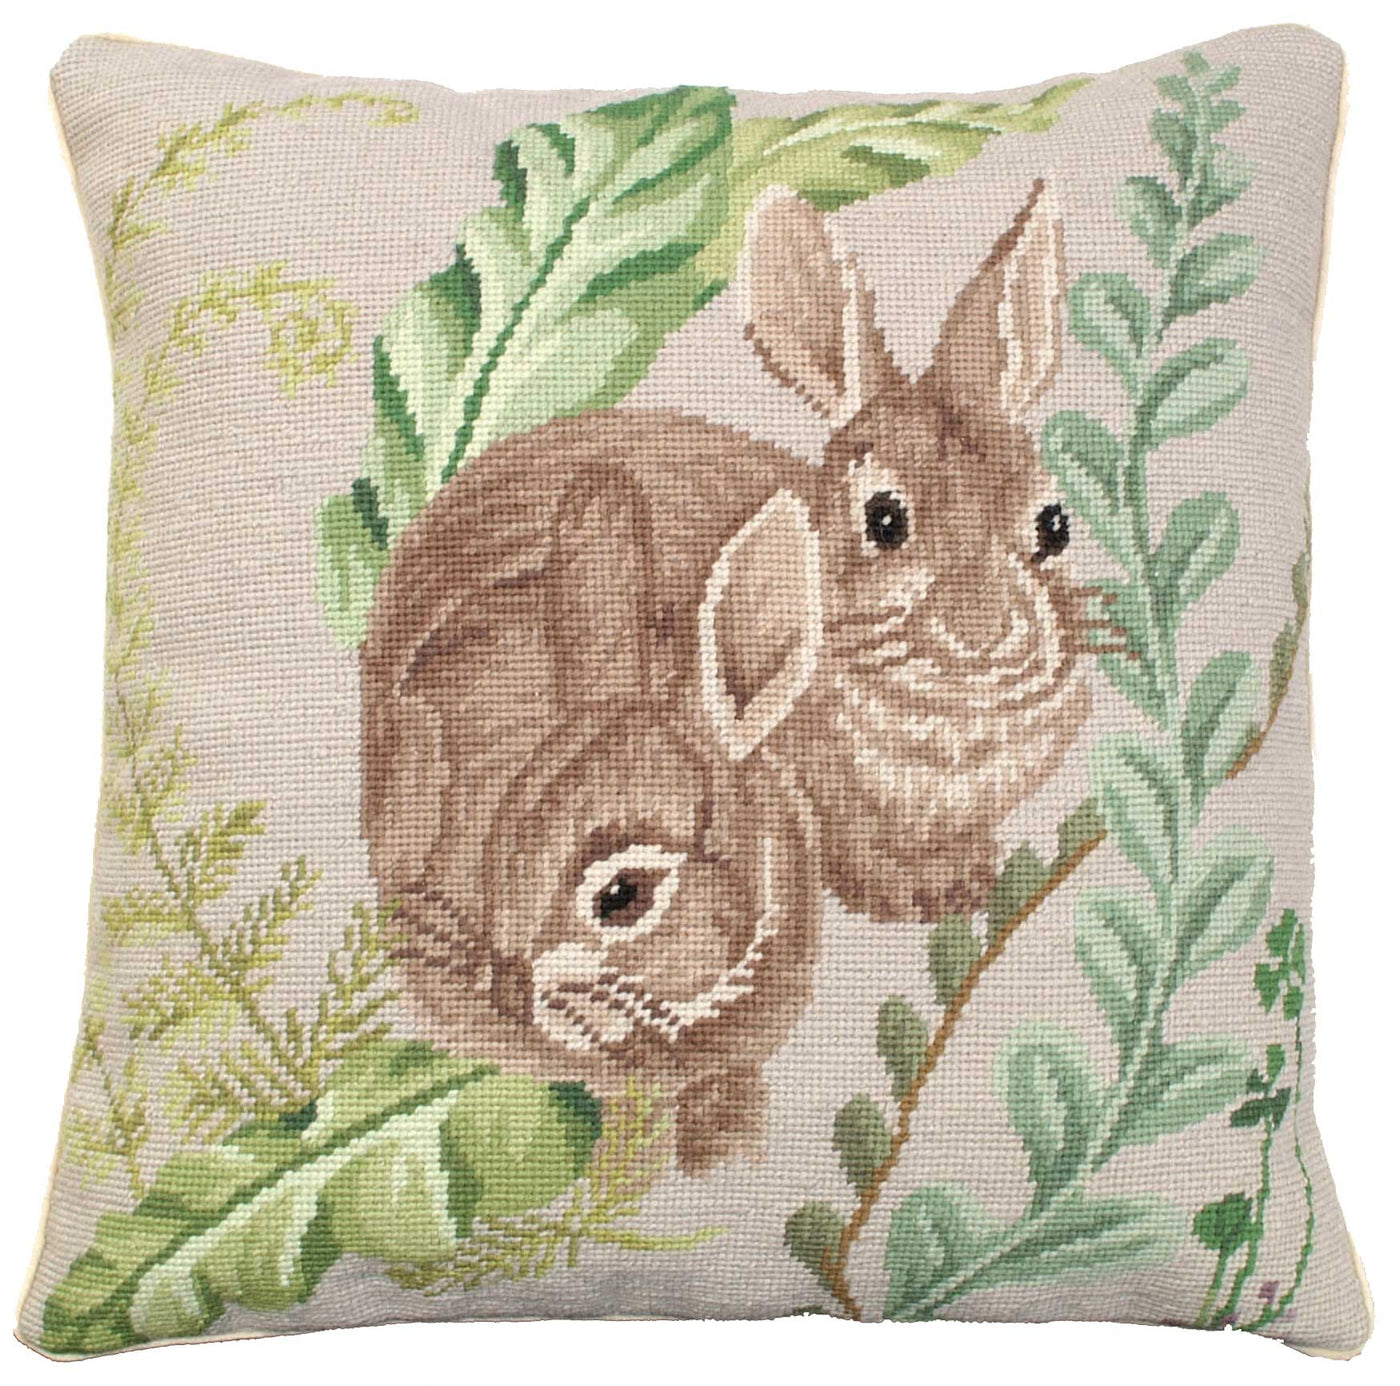 Rabbits with Ferns